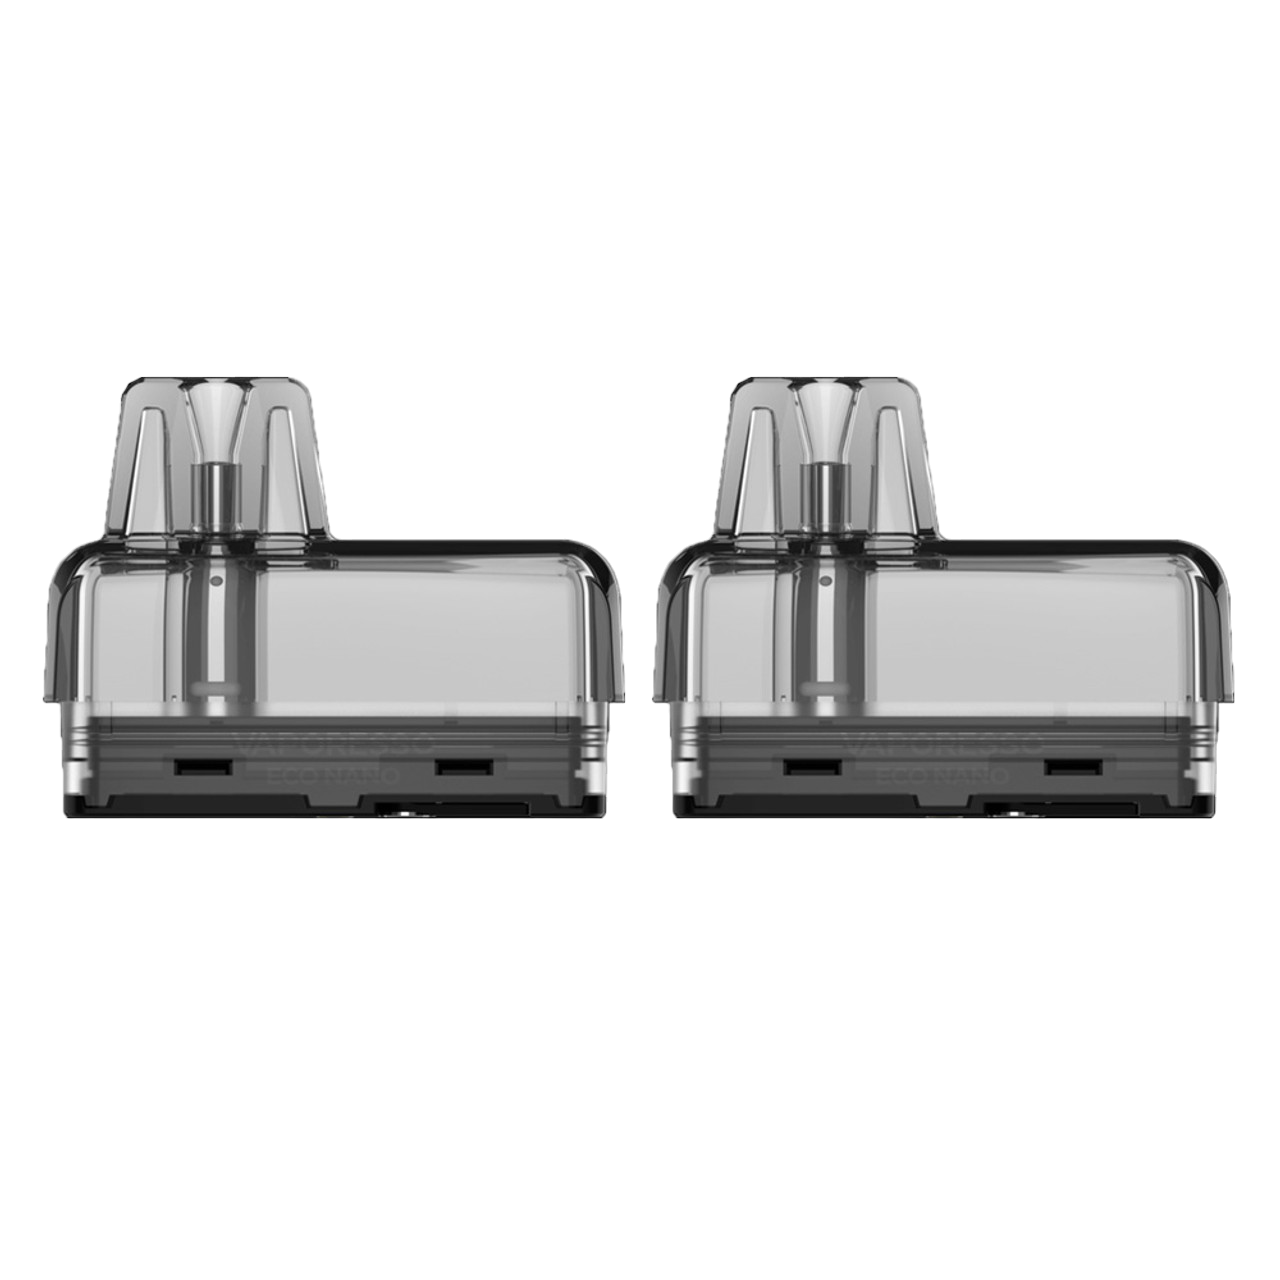 Vaporesso ECO NANO 6ML Refillable Replacement Mesh Pod - Pack of 2